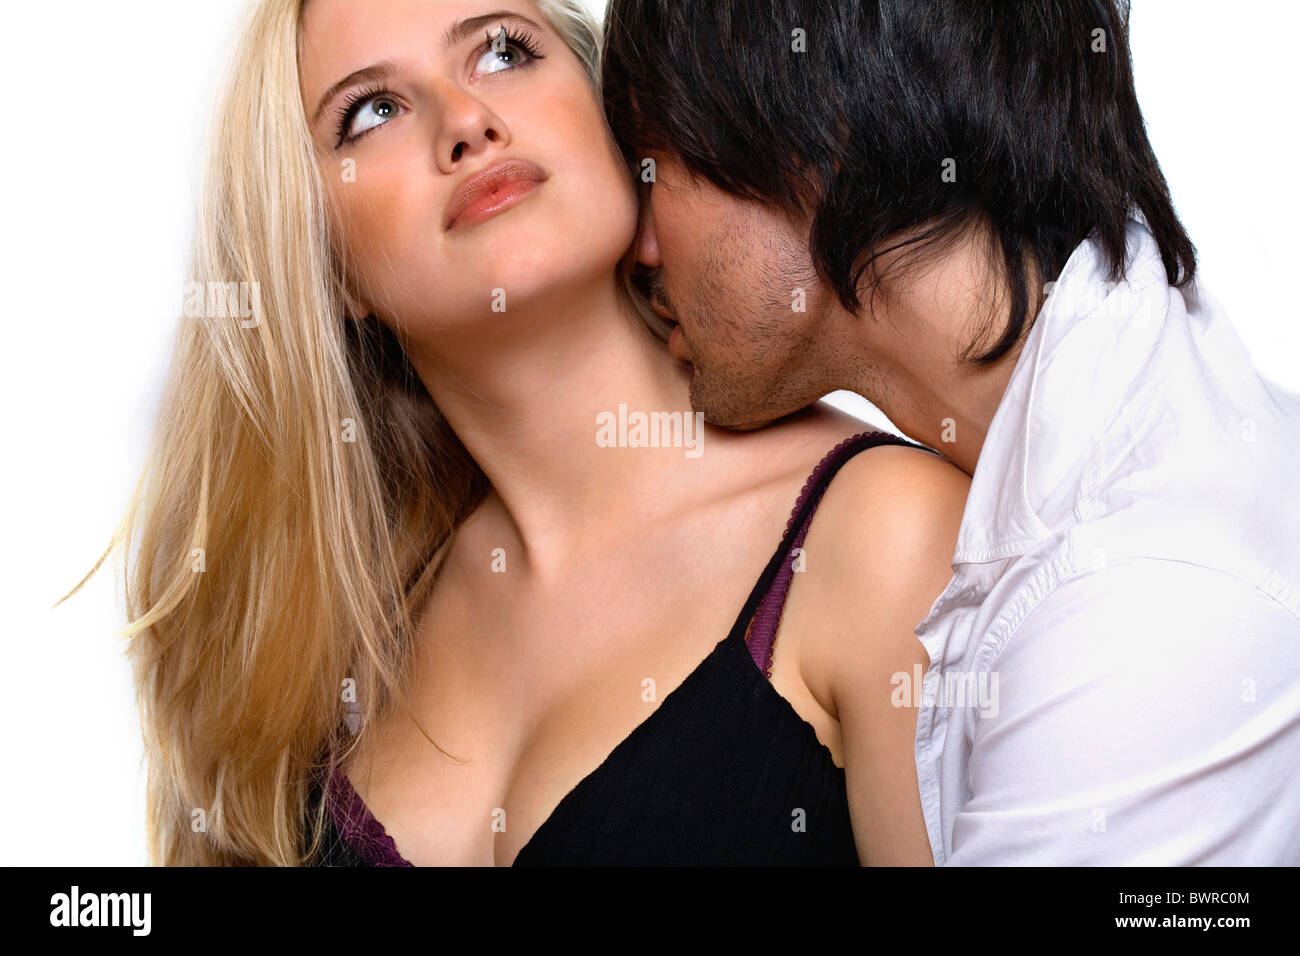 Young Couple 2 2-25 years Adult Adults Adults only Blond Blond hair Caucasians Close-up Couple Dark hair I Stock Photo